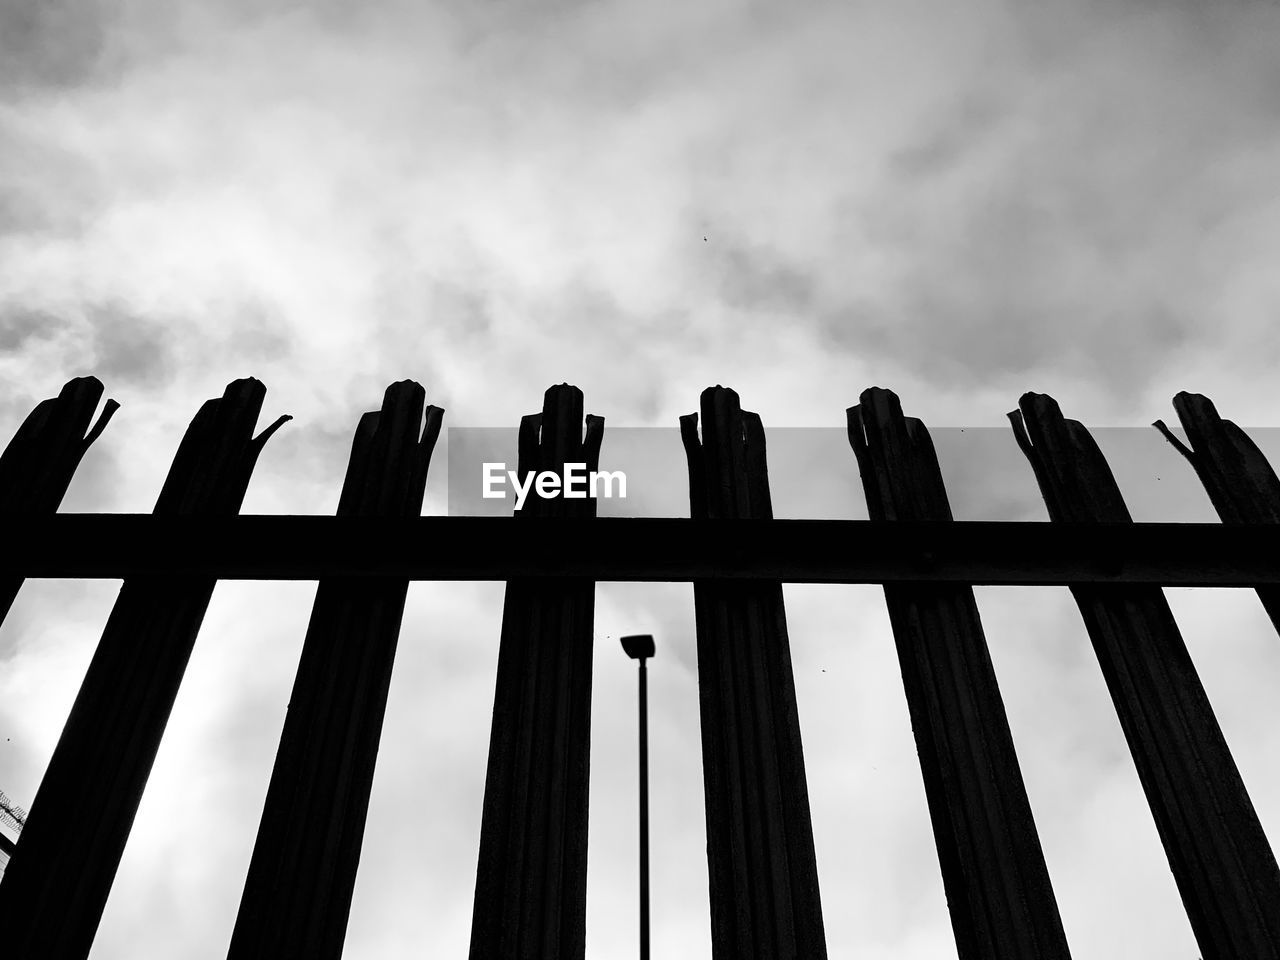 black, black and white, line, sky, monochrome, cloud, monochrome photography, no people, fence, white, nature, low angle view, protection, silhouette, security, font, architecture, wood, outdoors, day, darkness, in a row